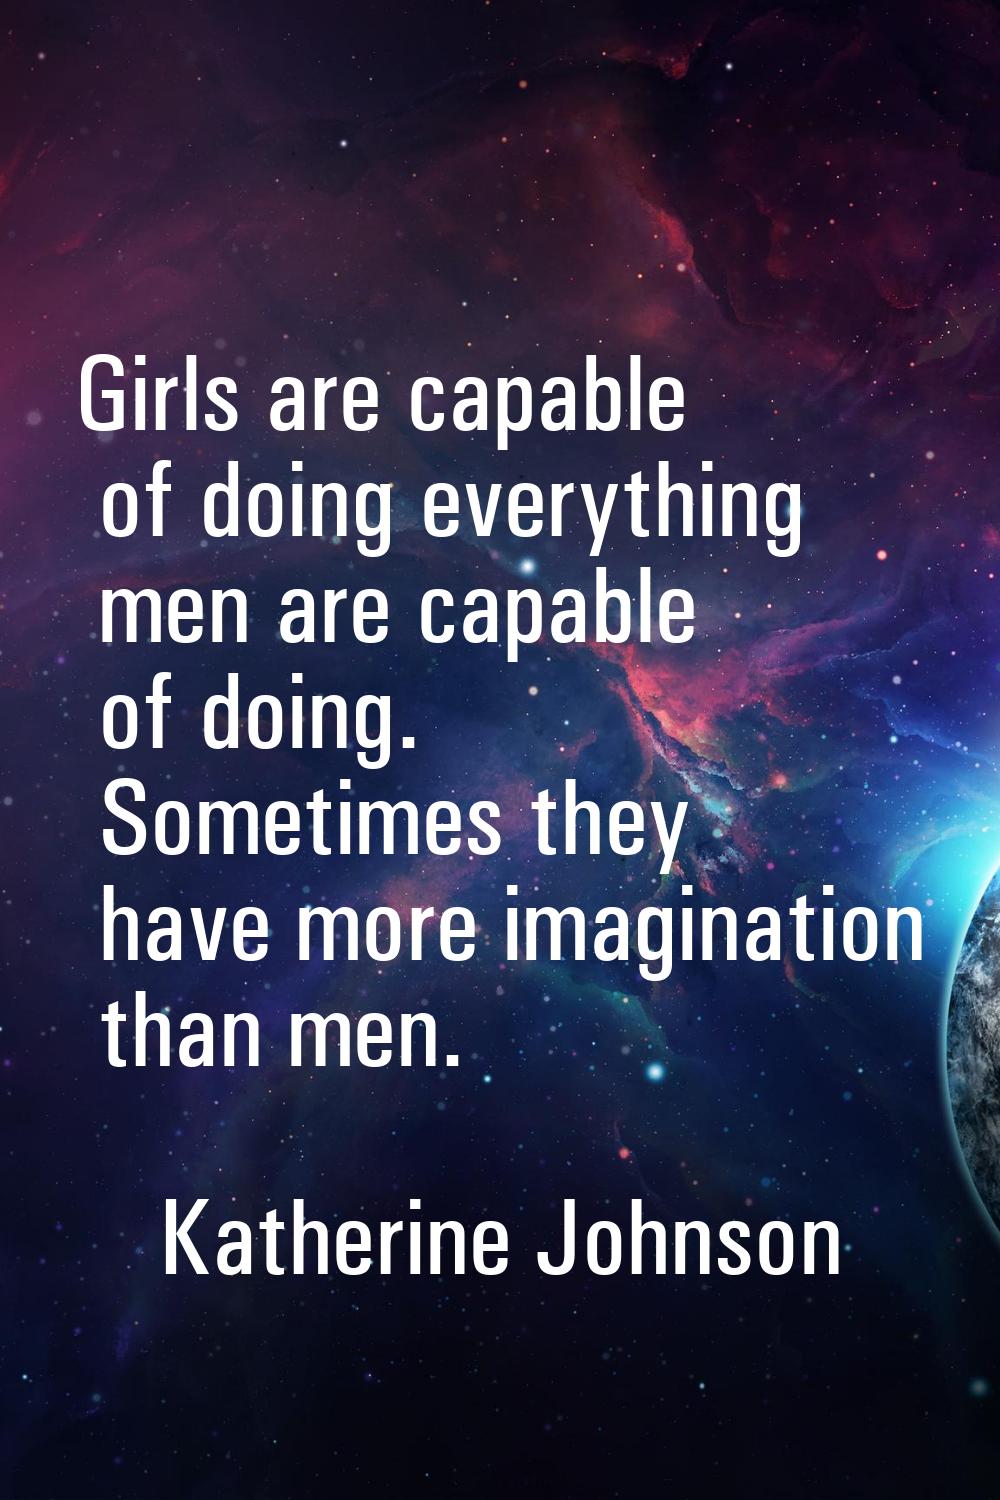 Girls are capable of doing everything men are capable of doing. Sometimes they have more imaginatio